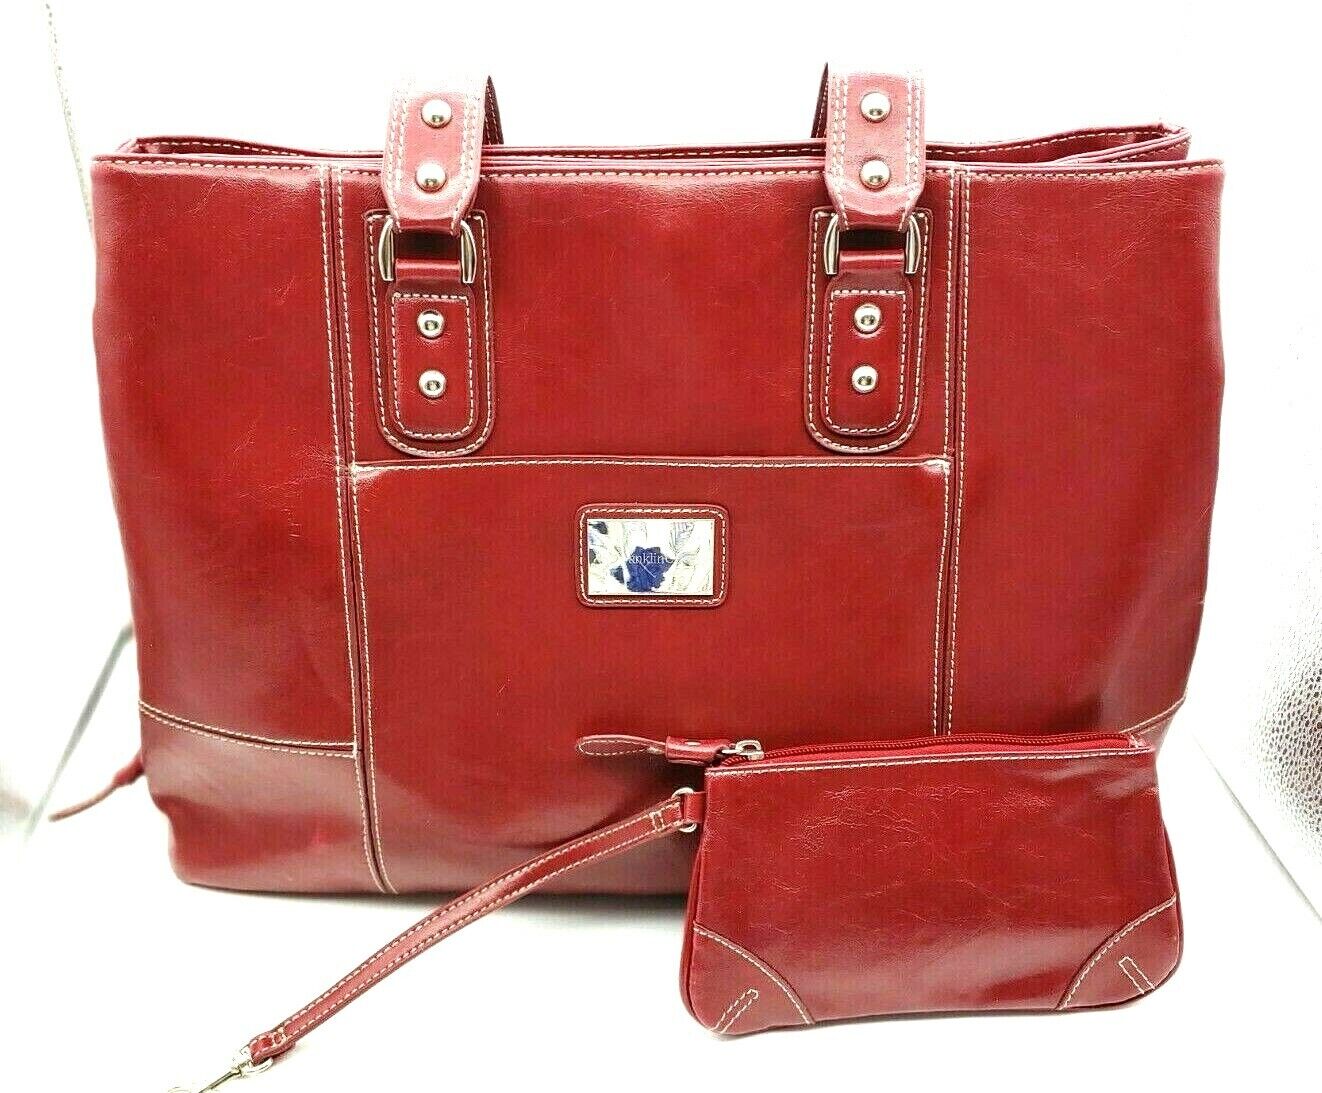 Franklin Covey Red Leather Business Organizer Laptop Briefcase w/ Wristlet New